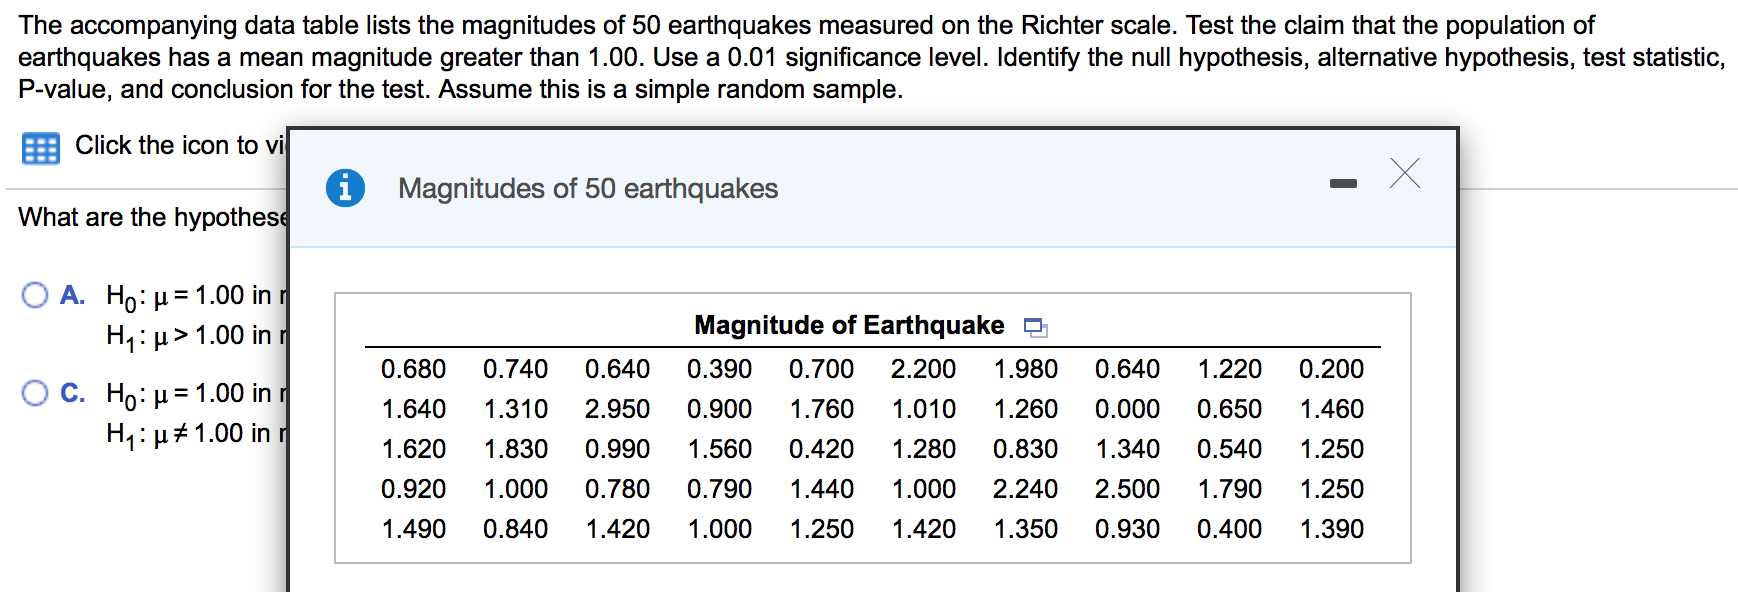 The accompanying data table lists the magnitudes of 50 earthquakes measured on the Richter scale. Test the claim that the population of
earthquakes has a mean magnitude greater than 1.00. Use a 0.01 significance level. Identify the null hypothesis, alternative hypothesis, test statistic,
P-value, and conclusion for the test. Assume this is a simple random sample.
Click the icon to vi
Magnitudes of 50 earthquakes
What are the hypothese
Ο Α. H μ= 1.00 in η
H1:µ> 1.00 in r
C. Ho: µ= 1.00 in r
H1: µ#1.00 in r
Magnitude of Earthquake
0.680
0.740
0.640
0.390
0.700
2.200
1.980
0.640
1.220
0.200
1.640
1.310
2.950
0.900
1.760
1.010
1.260
0.000
0.650
1.460
1.620
1.830
0.990
1.560
0.420
1.280
0.830
1.340
0.540
1.250
0.920
1.000
0.780
0.790
1.440
1.000
2.240
2.500
1.790
1.250
1.490
0.840
1.420
1.000
1.250
1.420
1.350
0.930
0.400
1.390
